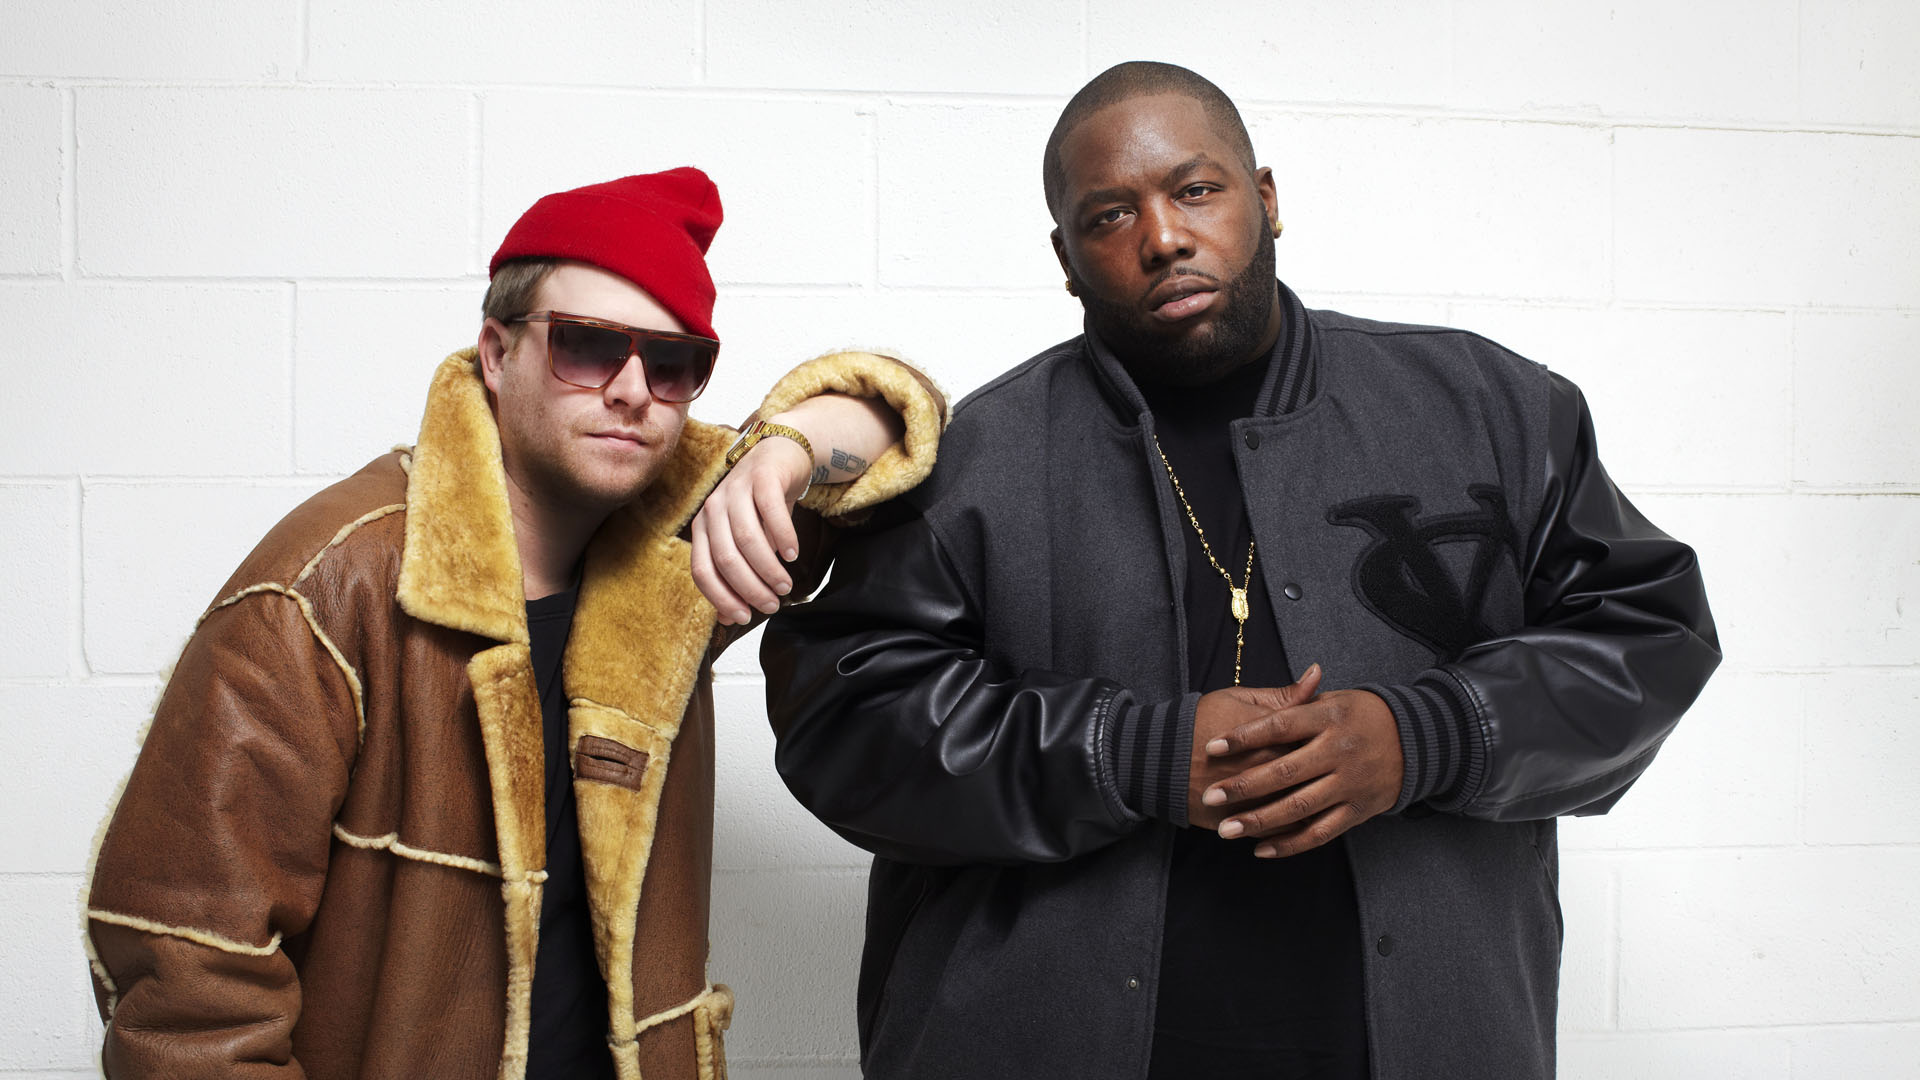 El-P and Killer Mike of Run The Jewels